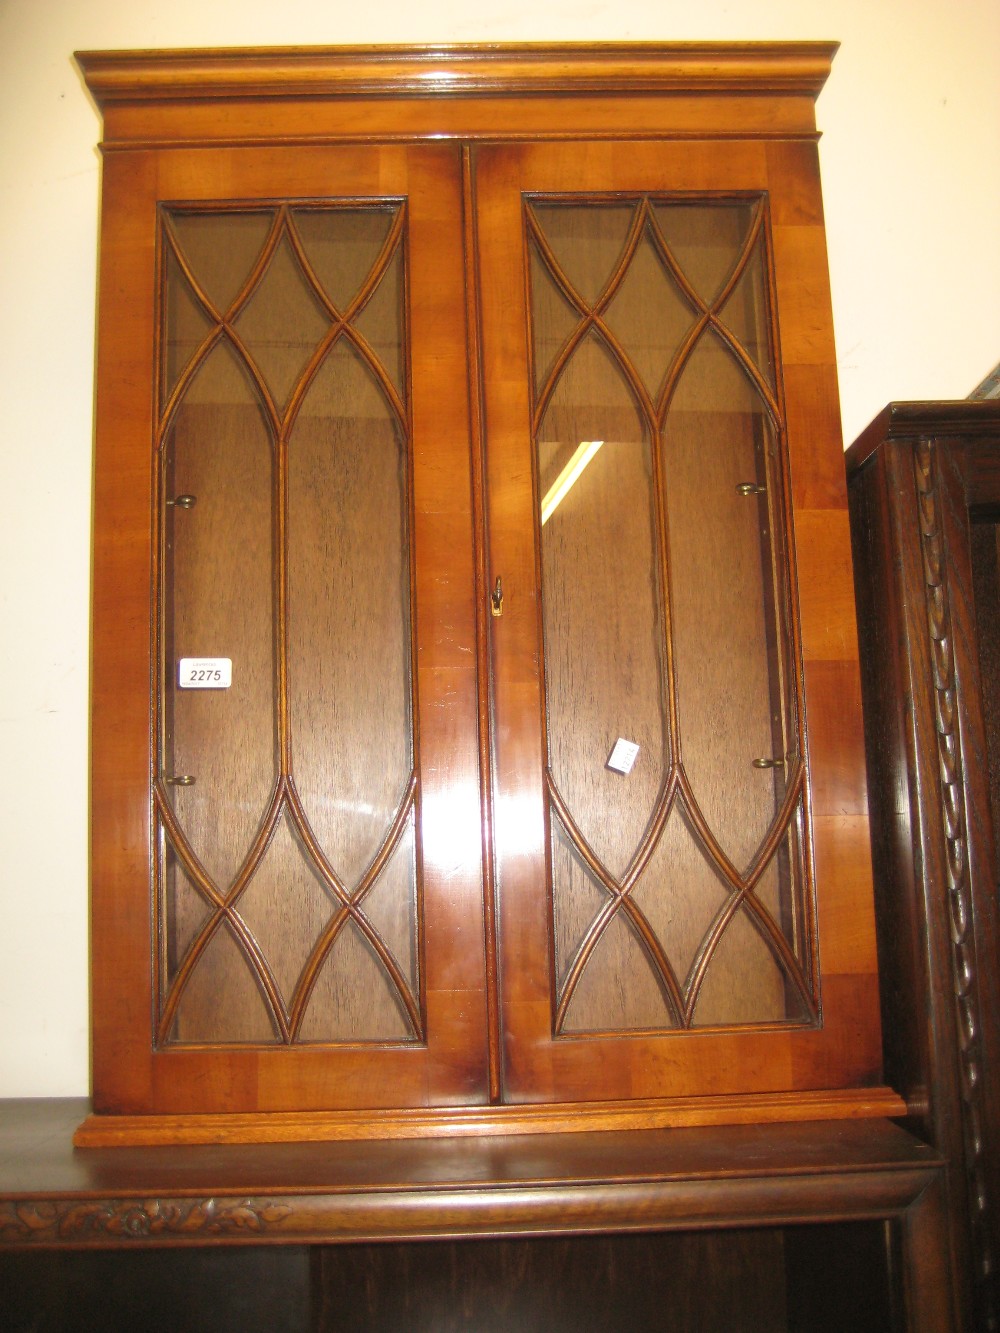 Reproduction yew wood two door wall cabinet with bar glazed door